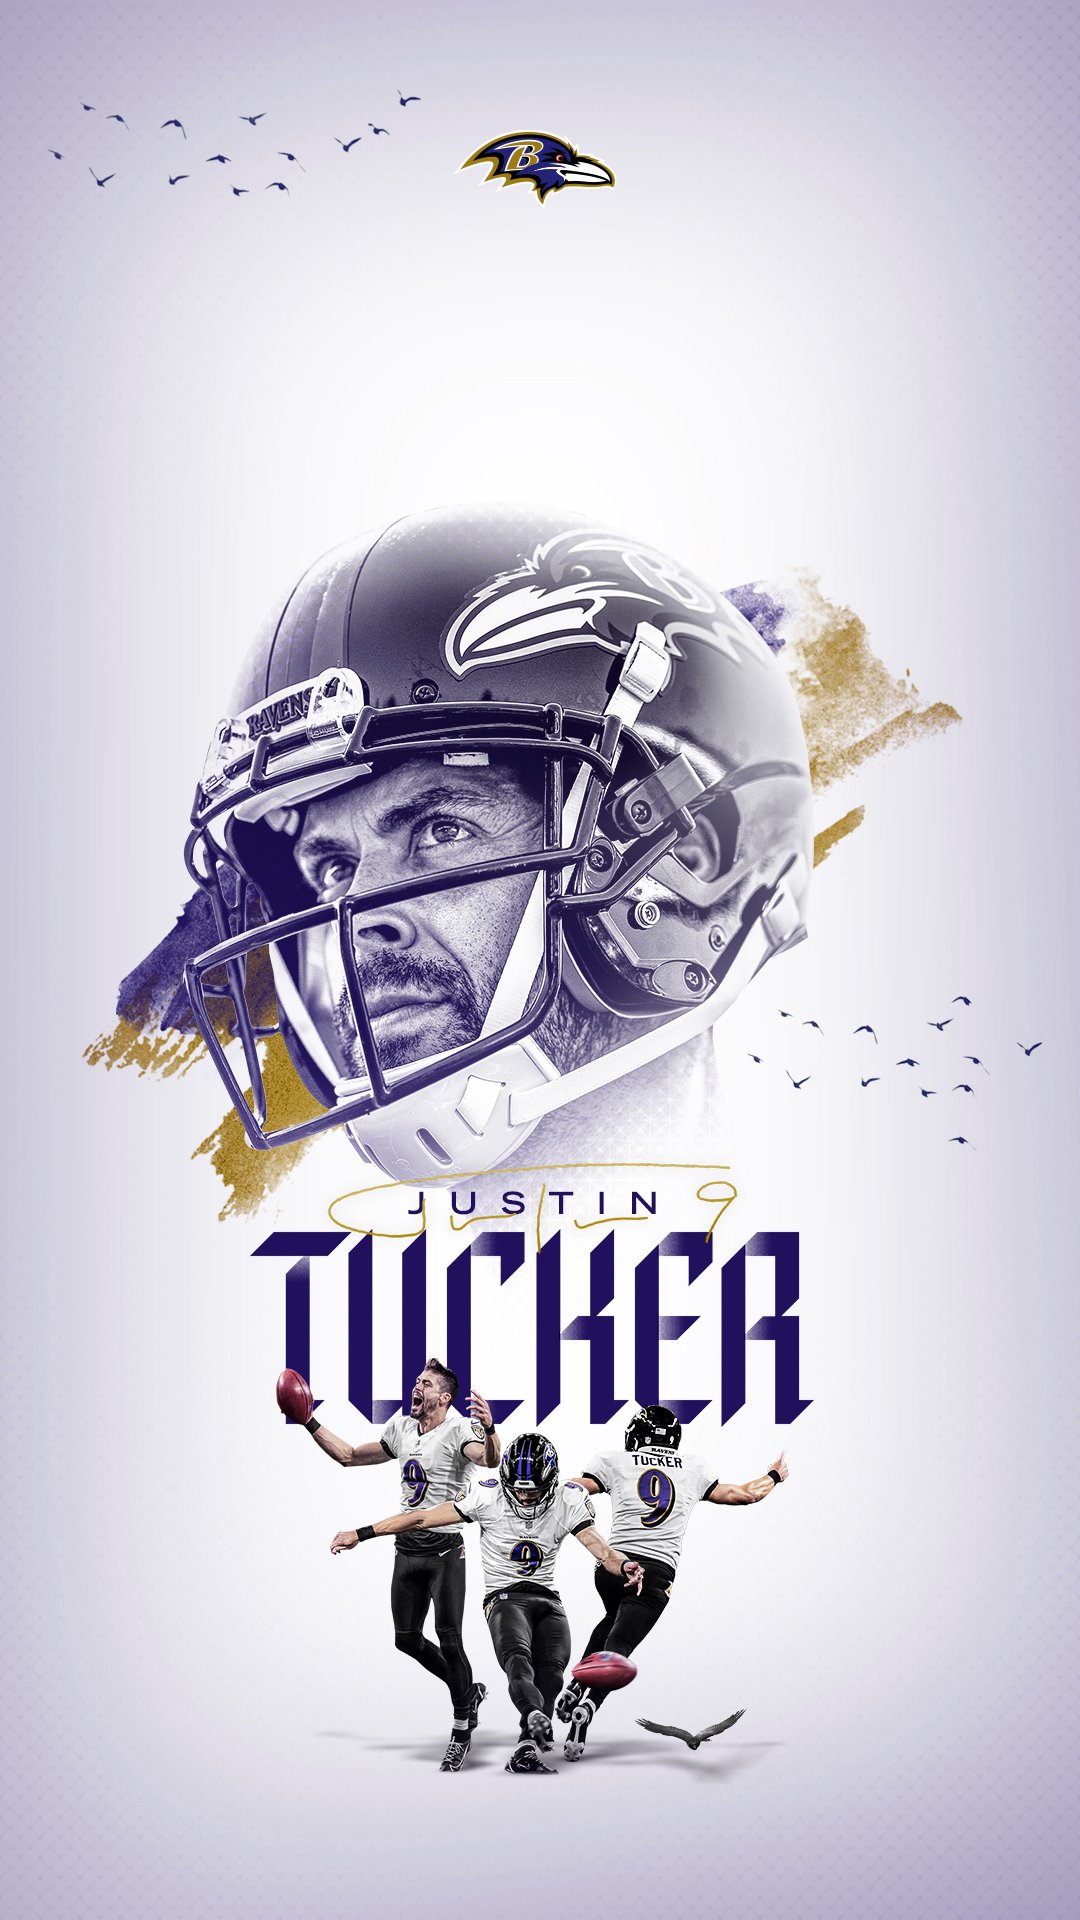 Baltimore Ravens to update those lock screens with some legends. #WallpaperWednesday